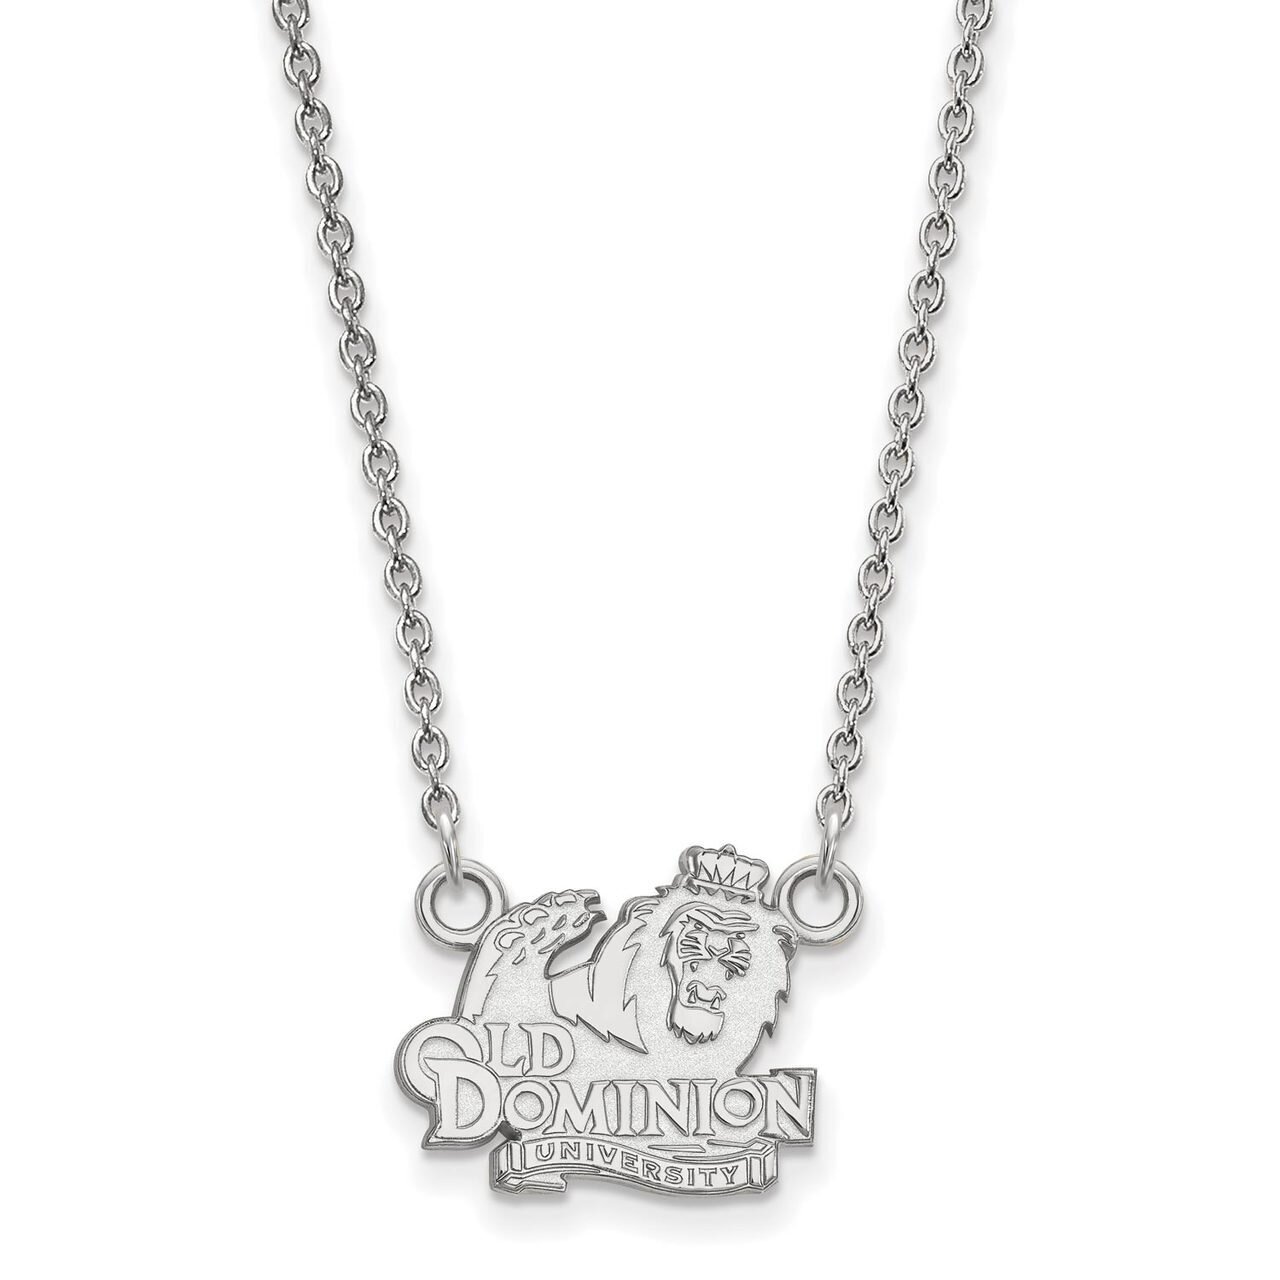 Old Dominion University Small Pendant with Chain Necklace 14k White Gold 4W011ODU-18